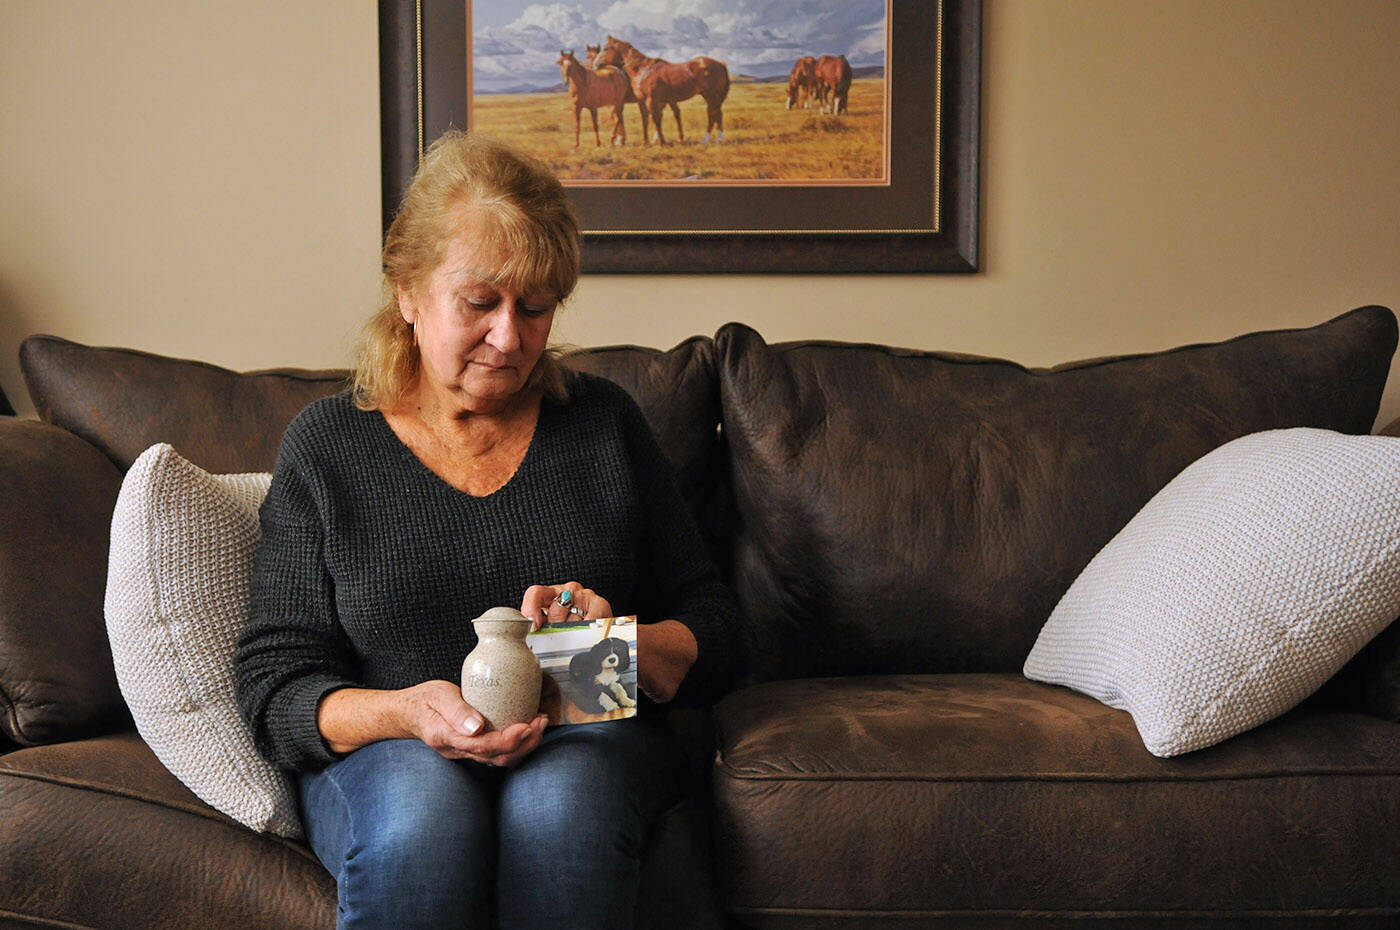 Shirley Sawatsky holds an urn and a photo of her dog Texas who was killed on Nov. 16 by two pit bulls. She is seen here in her Chilliwack home on Nov. 30, 2021. (Jenna Hauck/ Chilliwack Progress)